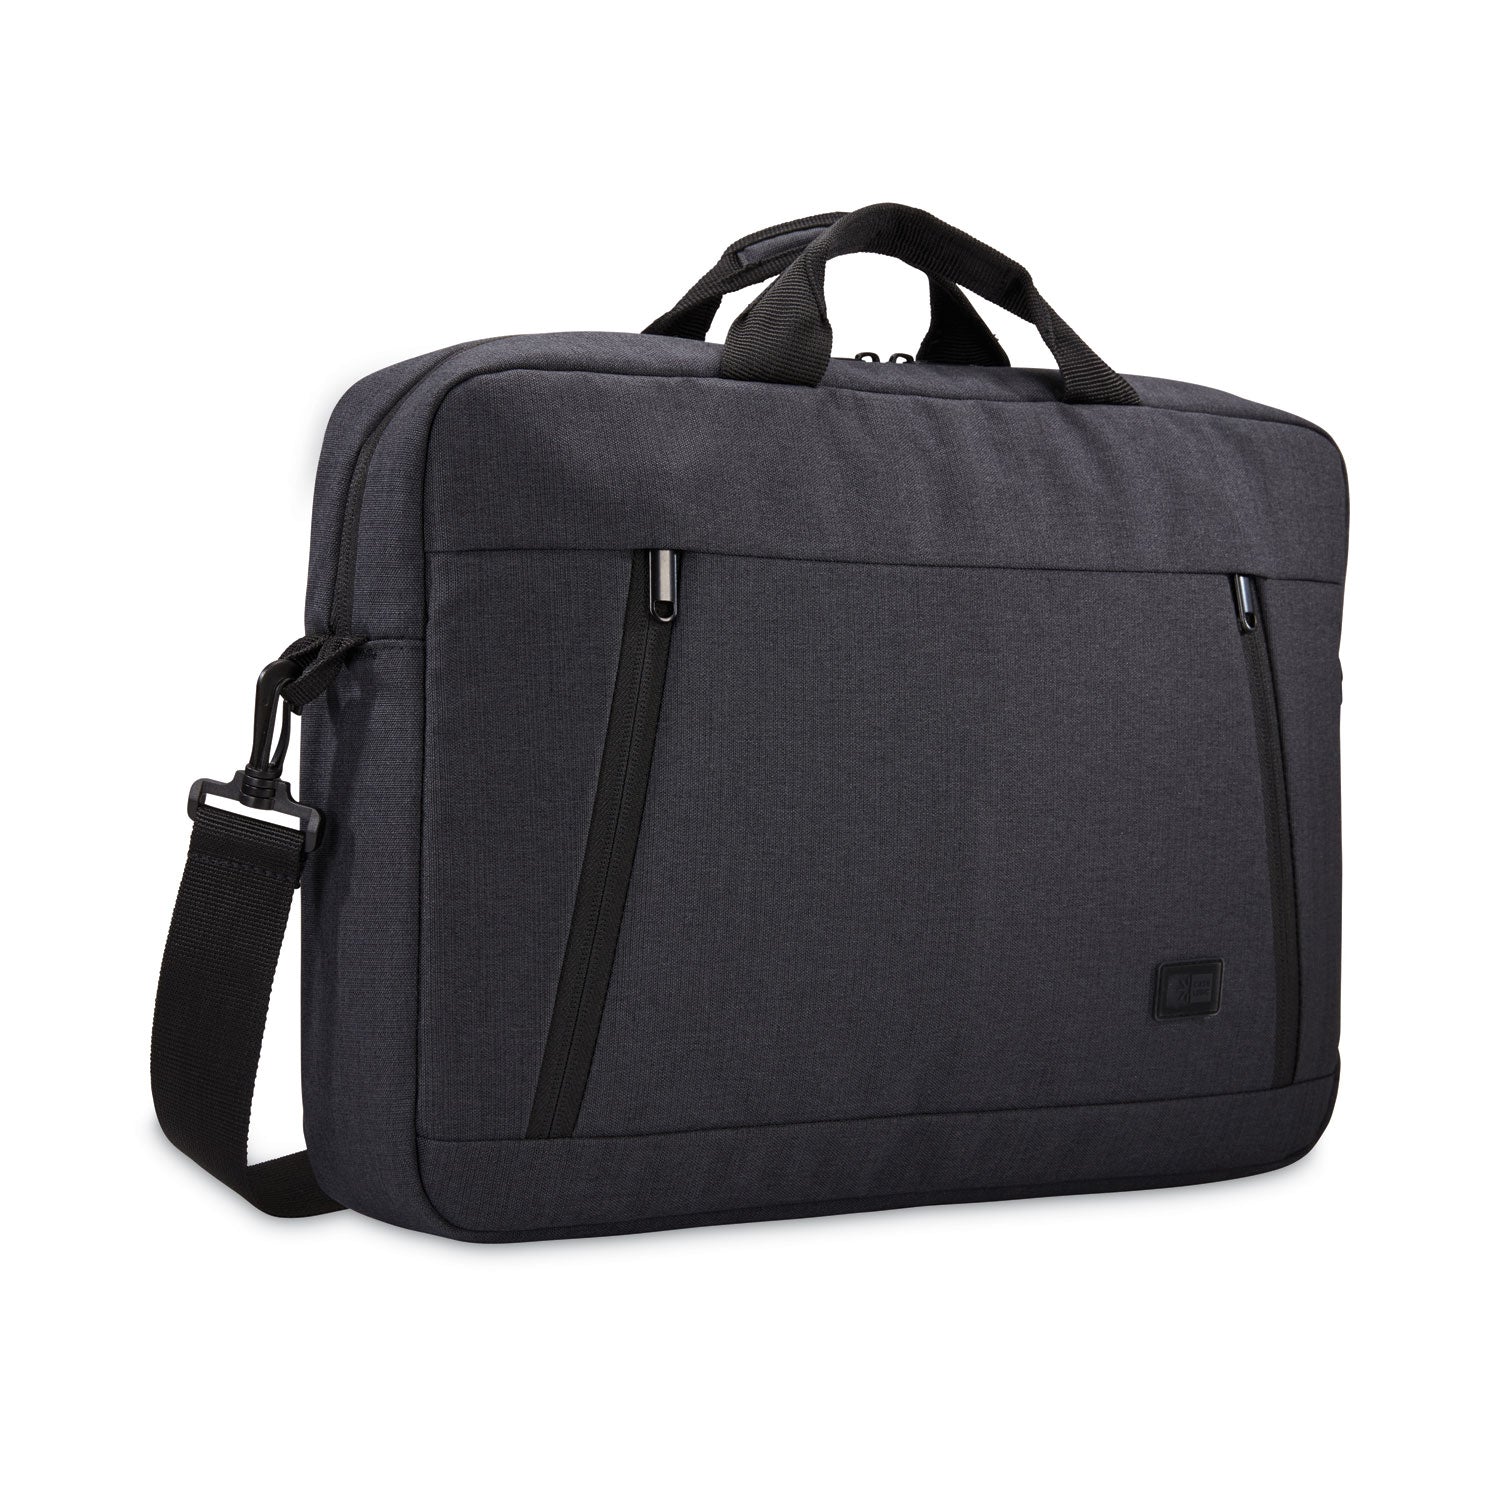 huxton-156-laptop-attache-fits-devices-up-to-156-polyester-163-x-28-x-124-black_clg3204653 - 1